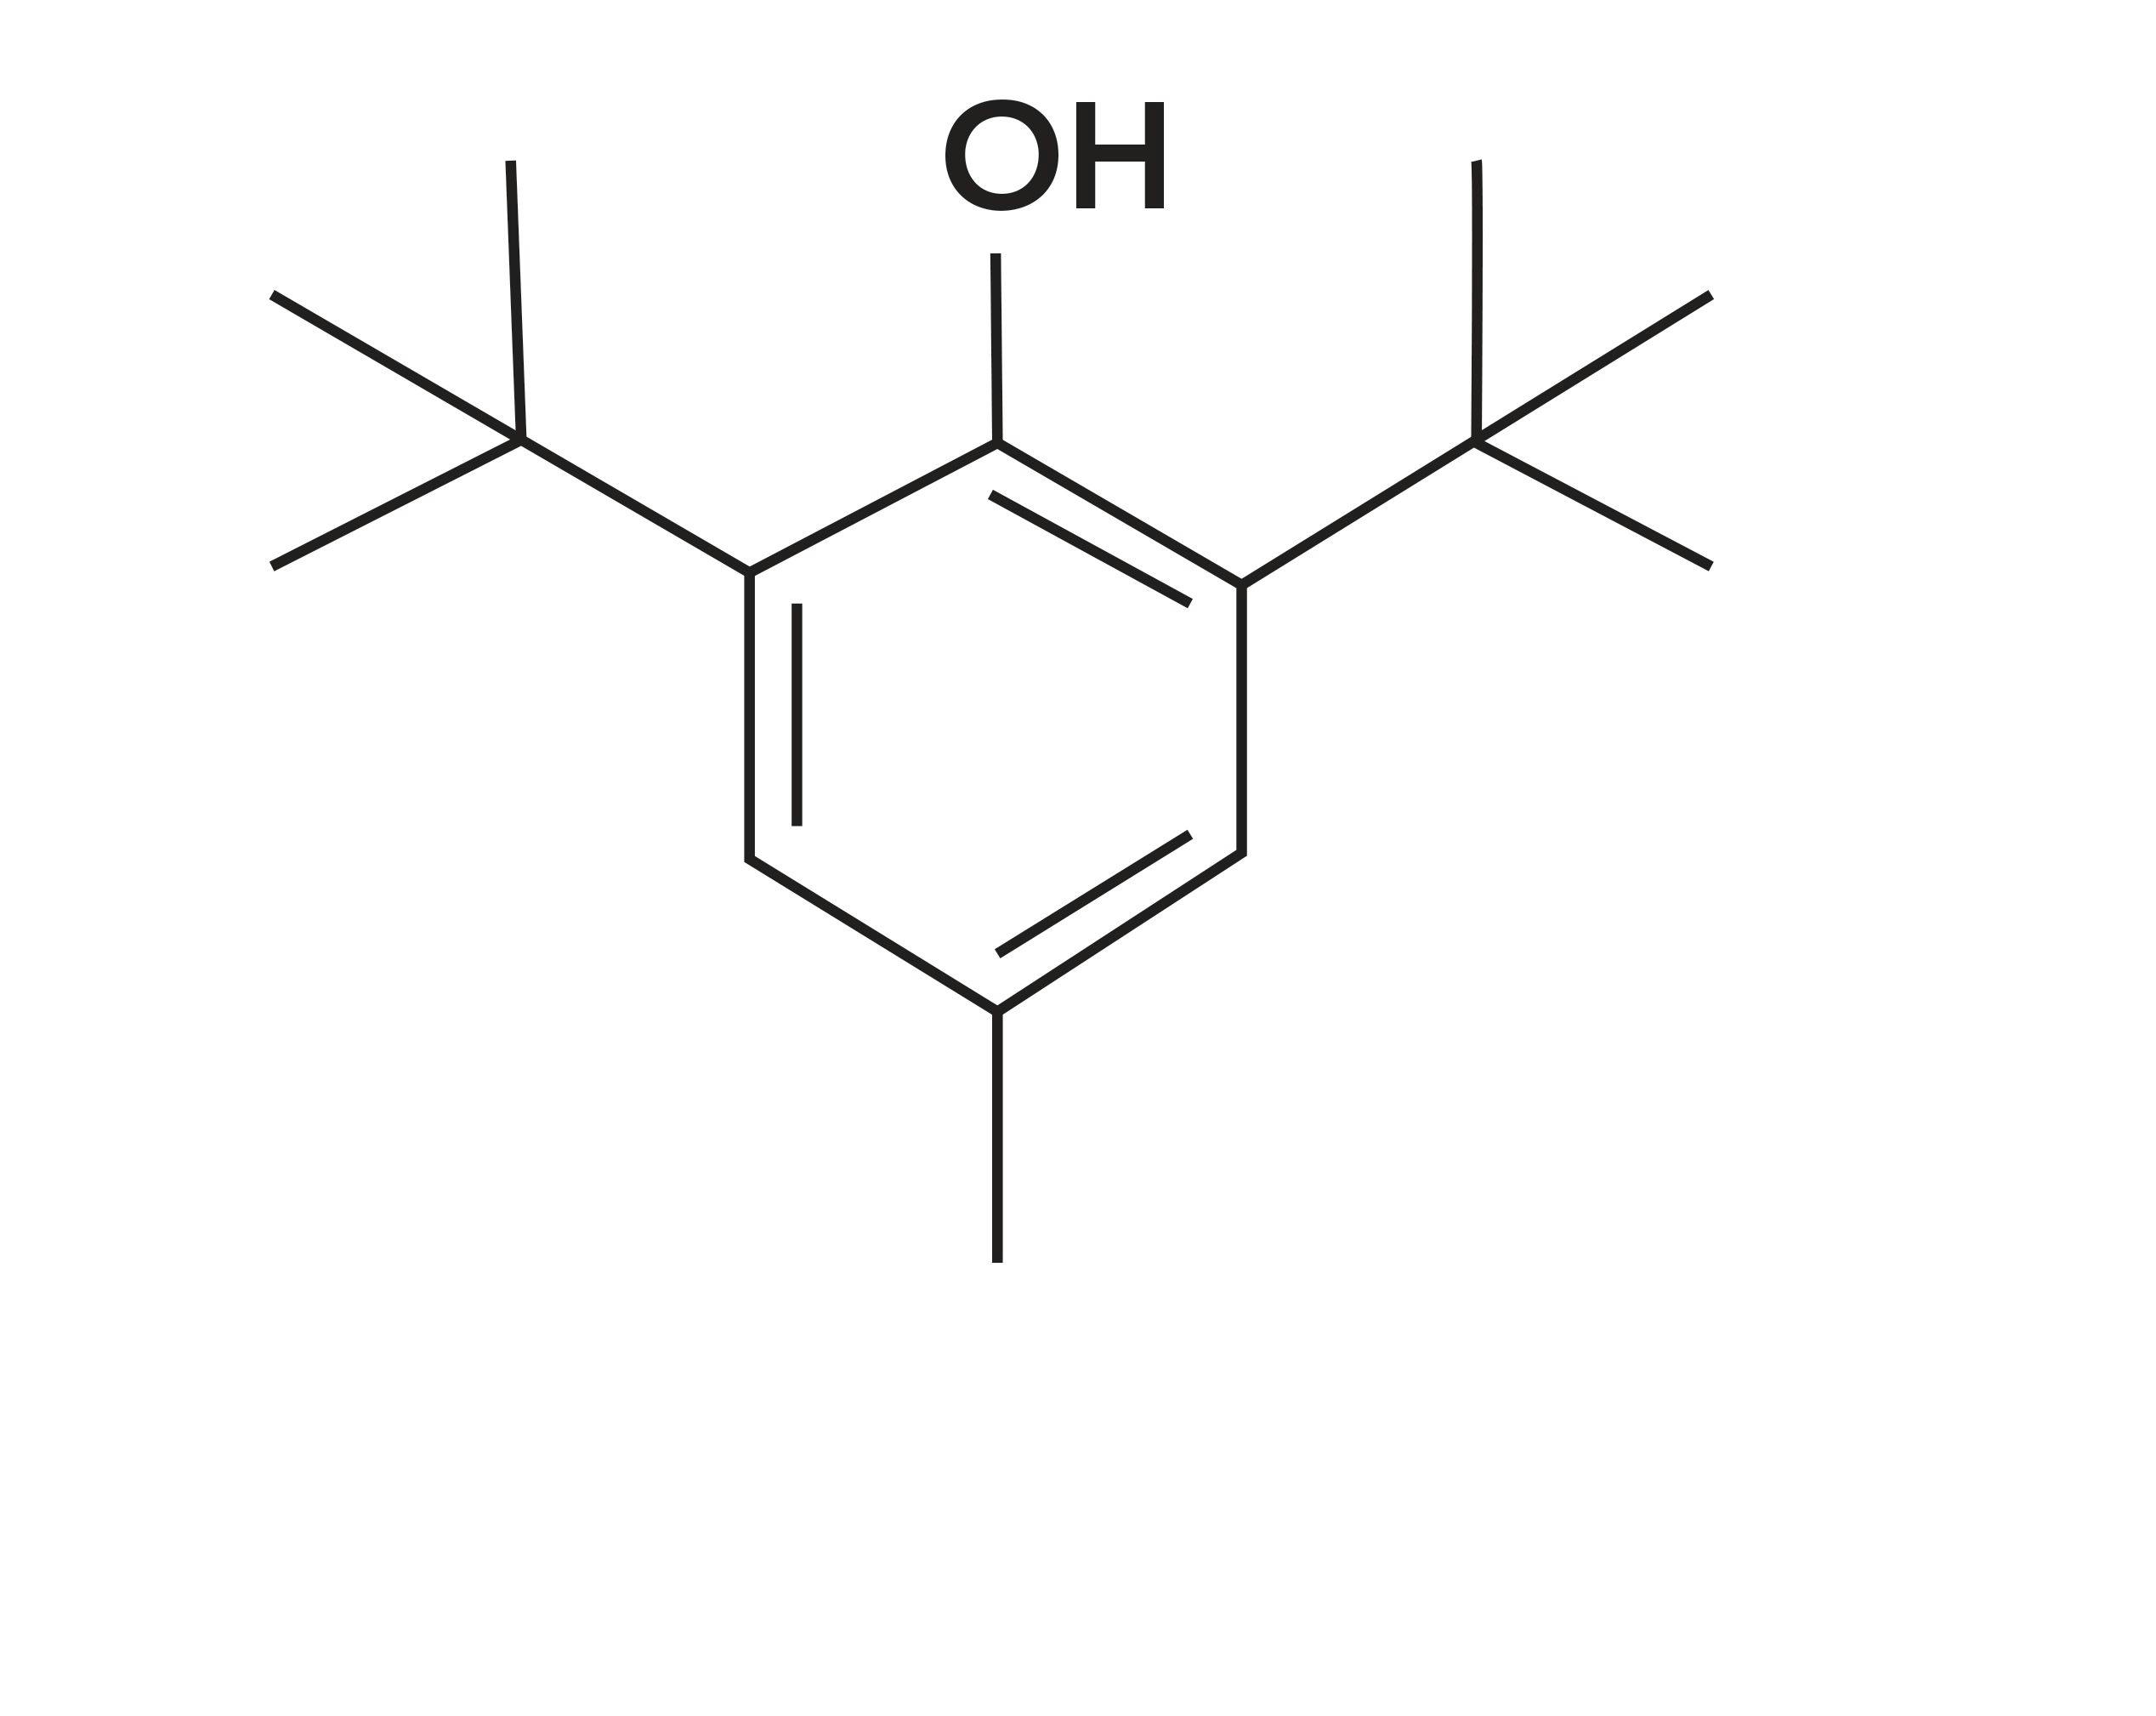 Figure 5: Chemical structure of BHT.